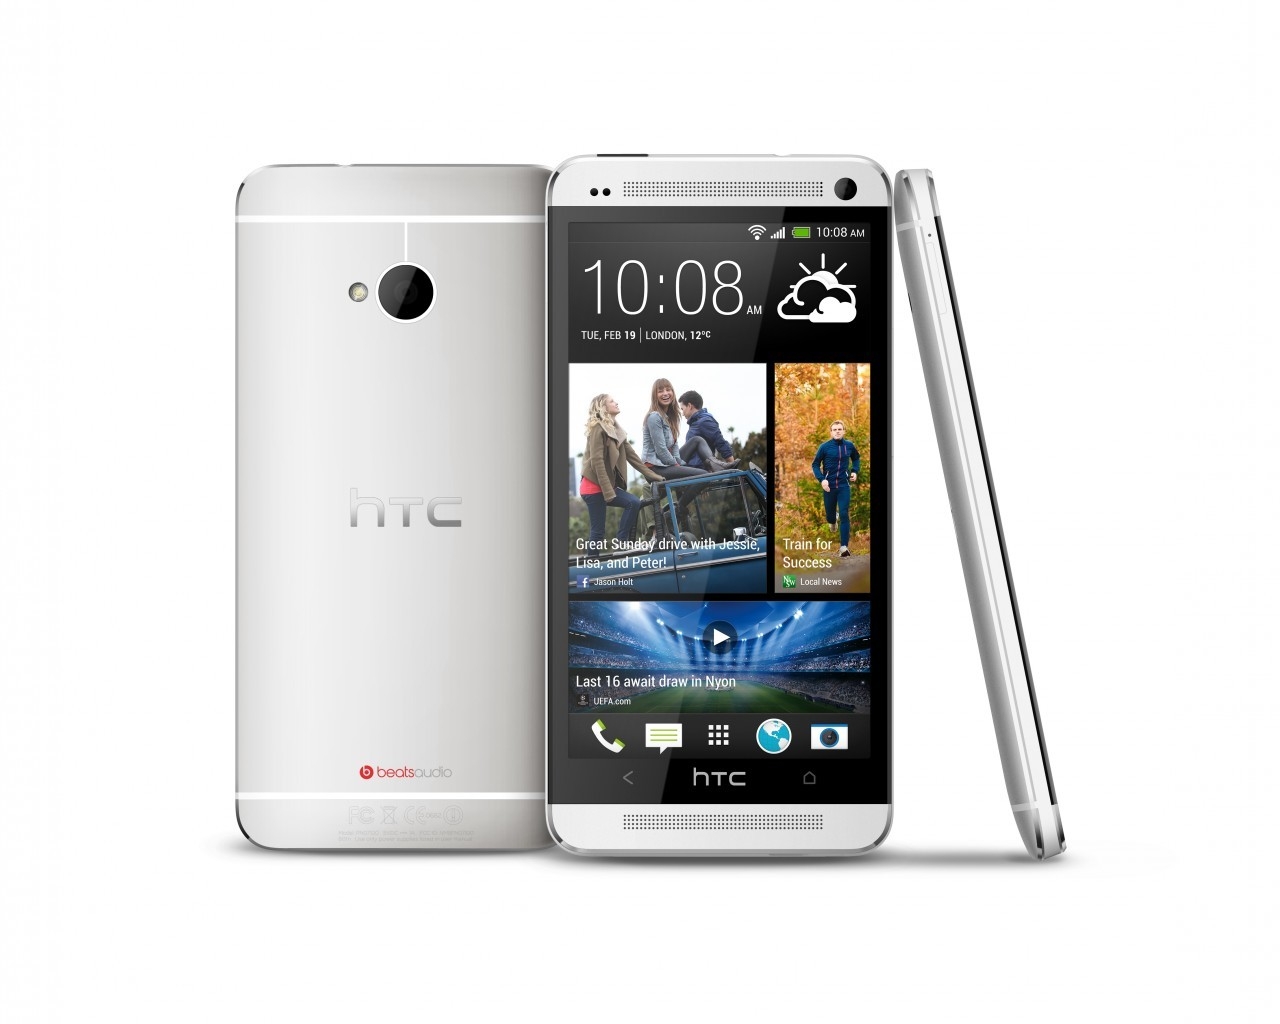 HTC One White for 1280 x 1024 resolution